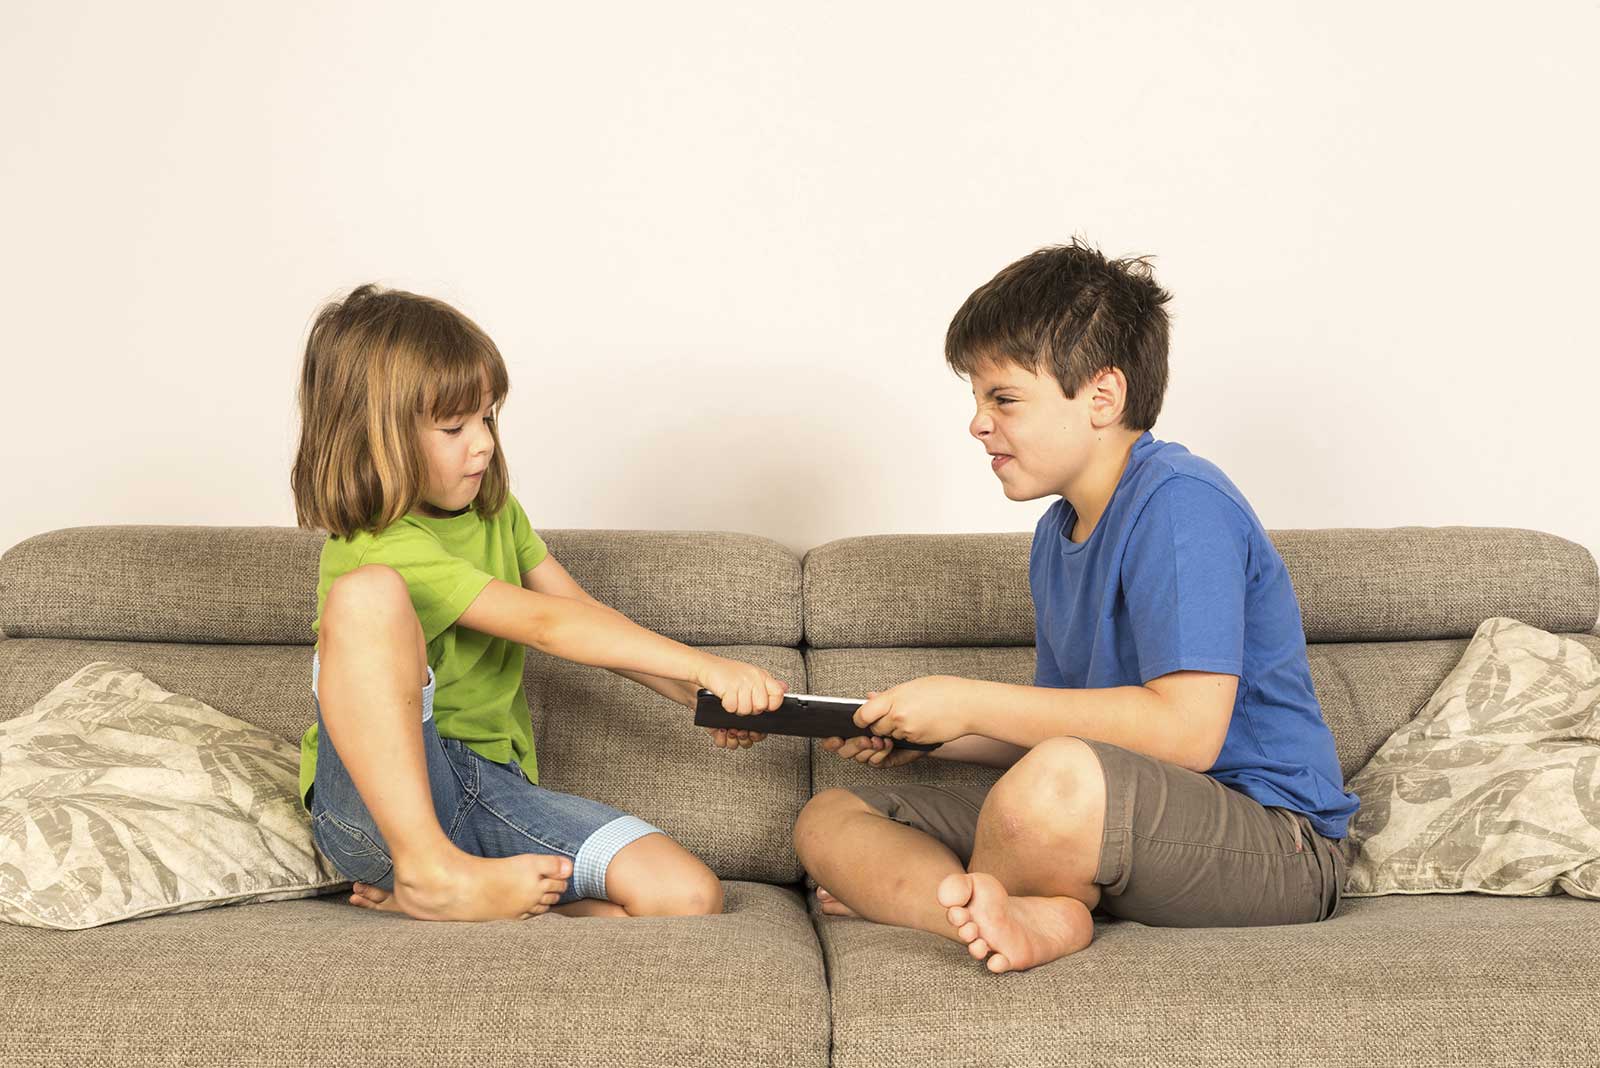 Children on couch with remote